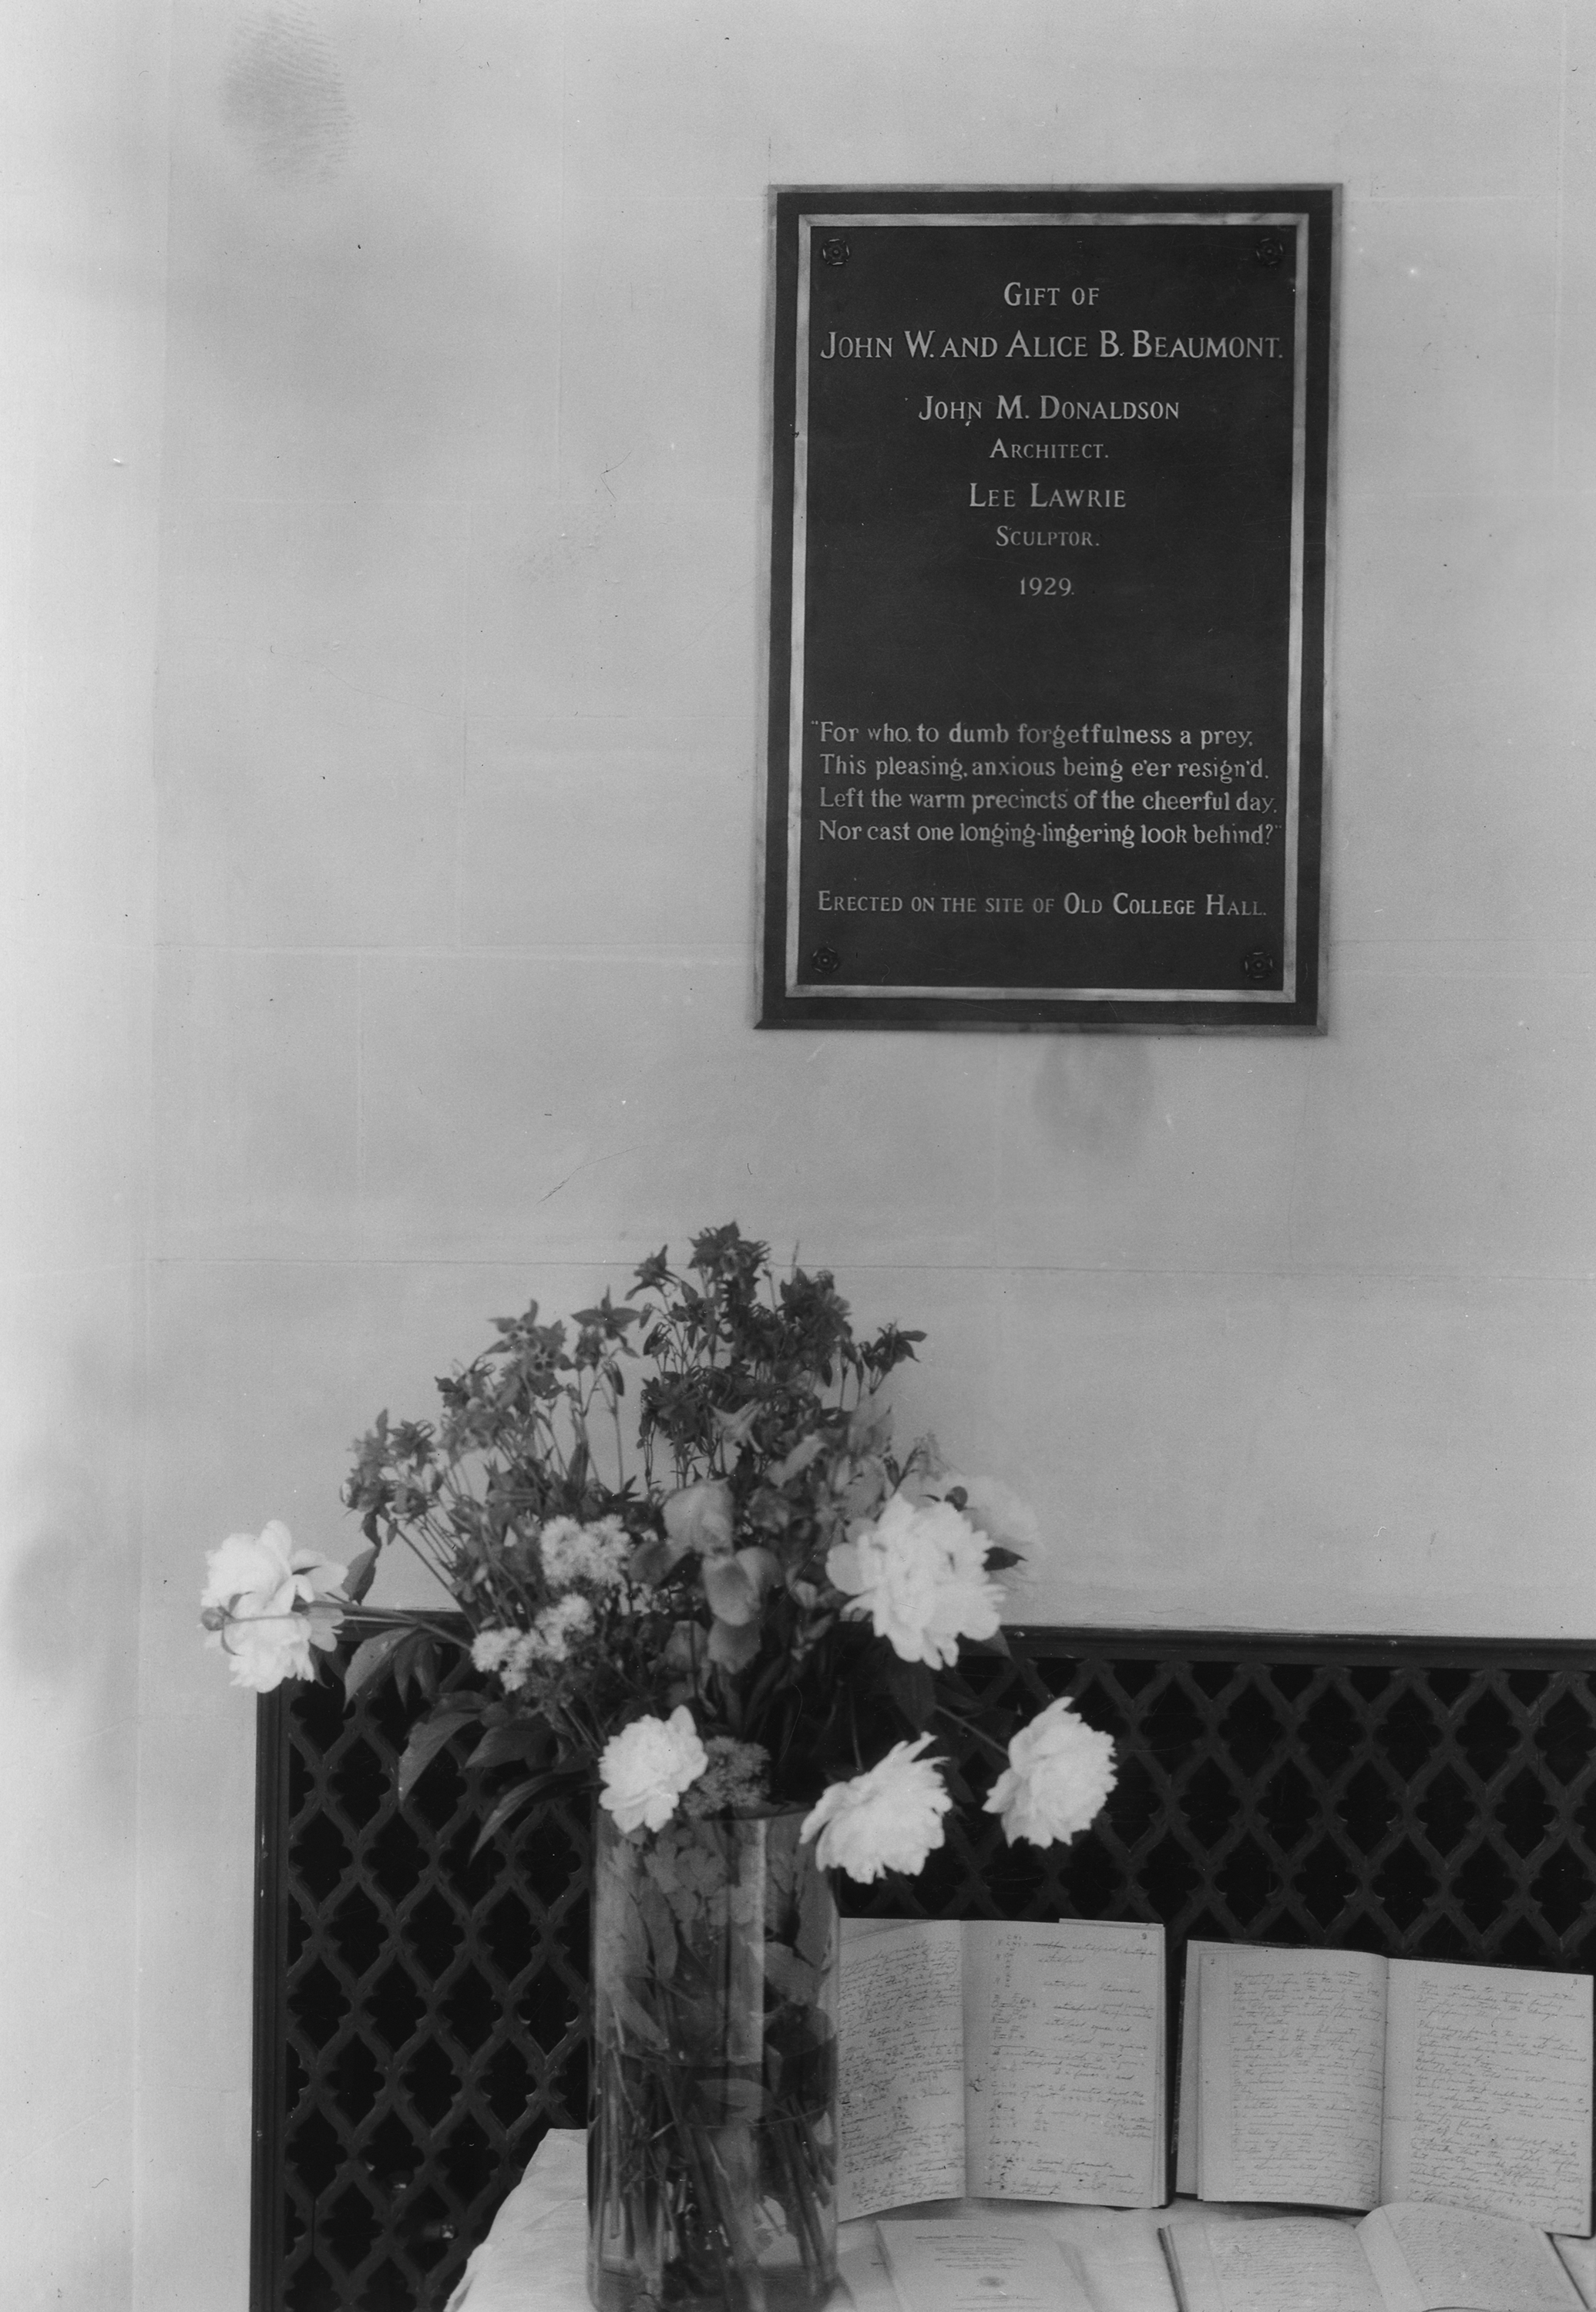 Plaque inside Beaumont Tower, undated